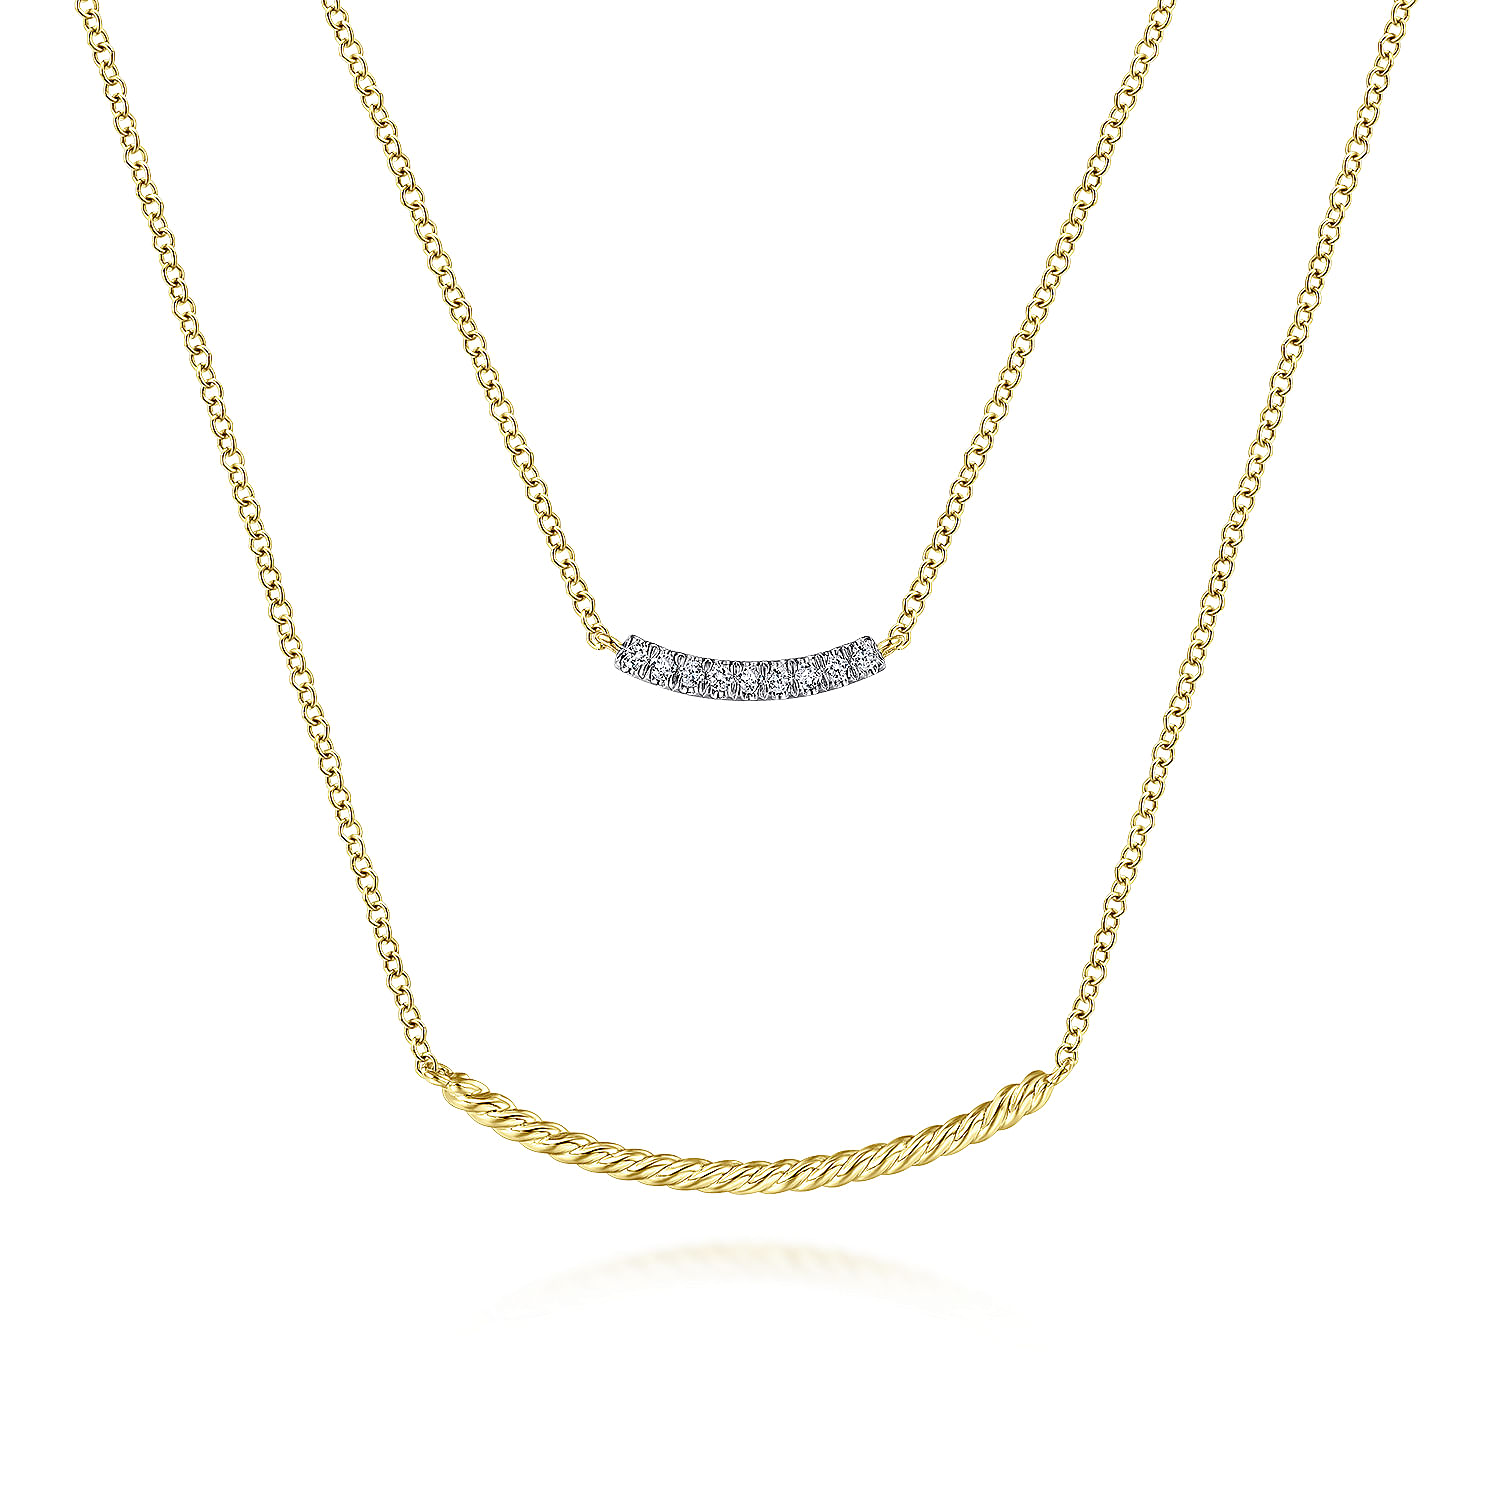 14K Yellow Gold Two Strand Twisted and Diamond Bar Necklace